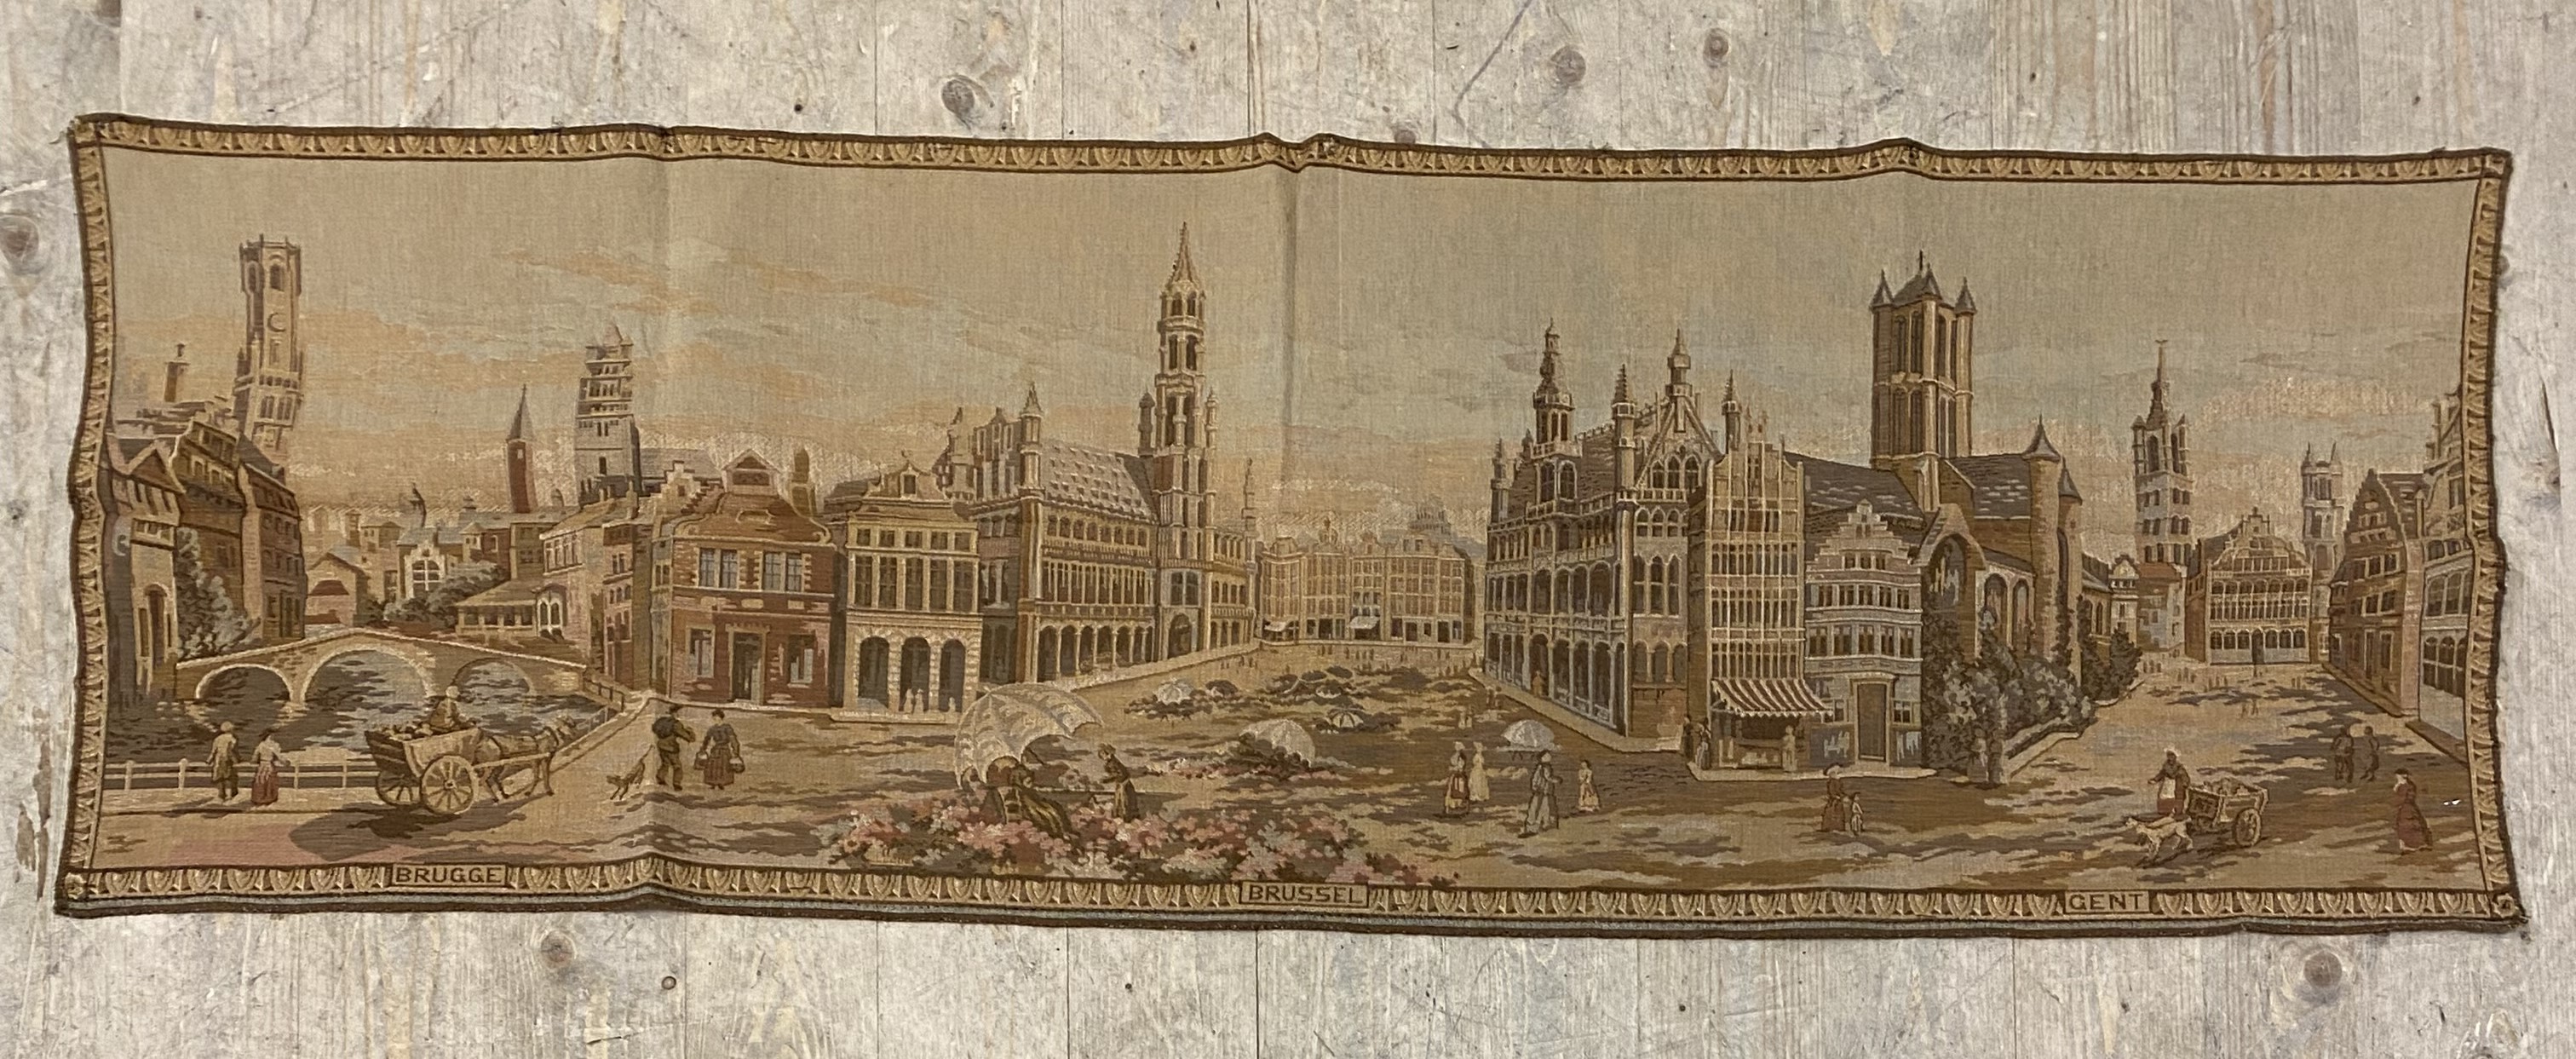 A French style tapestry wall hanging, depicting a Romanticised urban vista 144cm x 49cm.